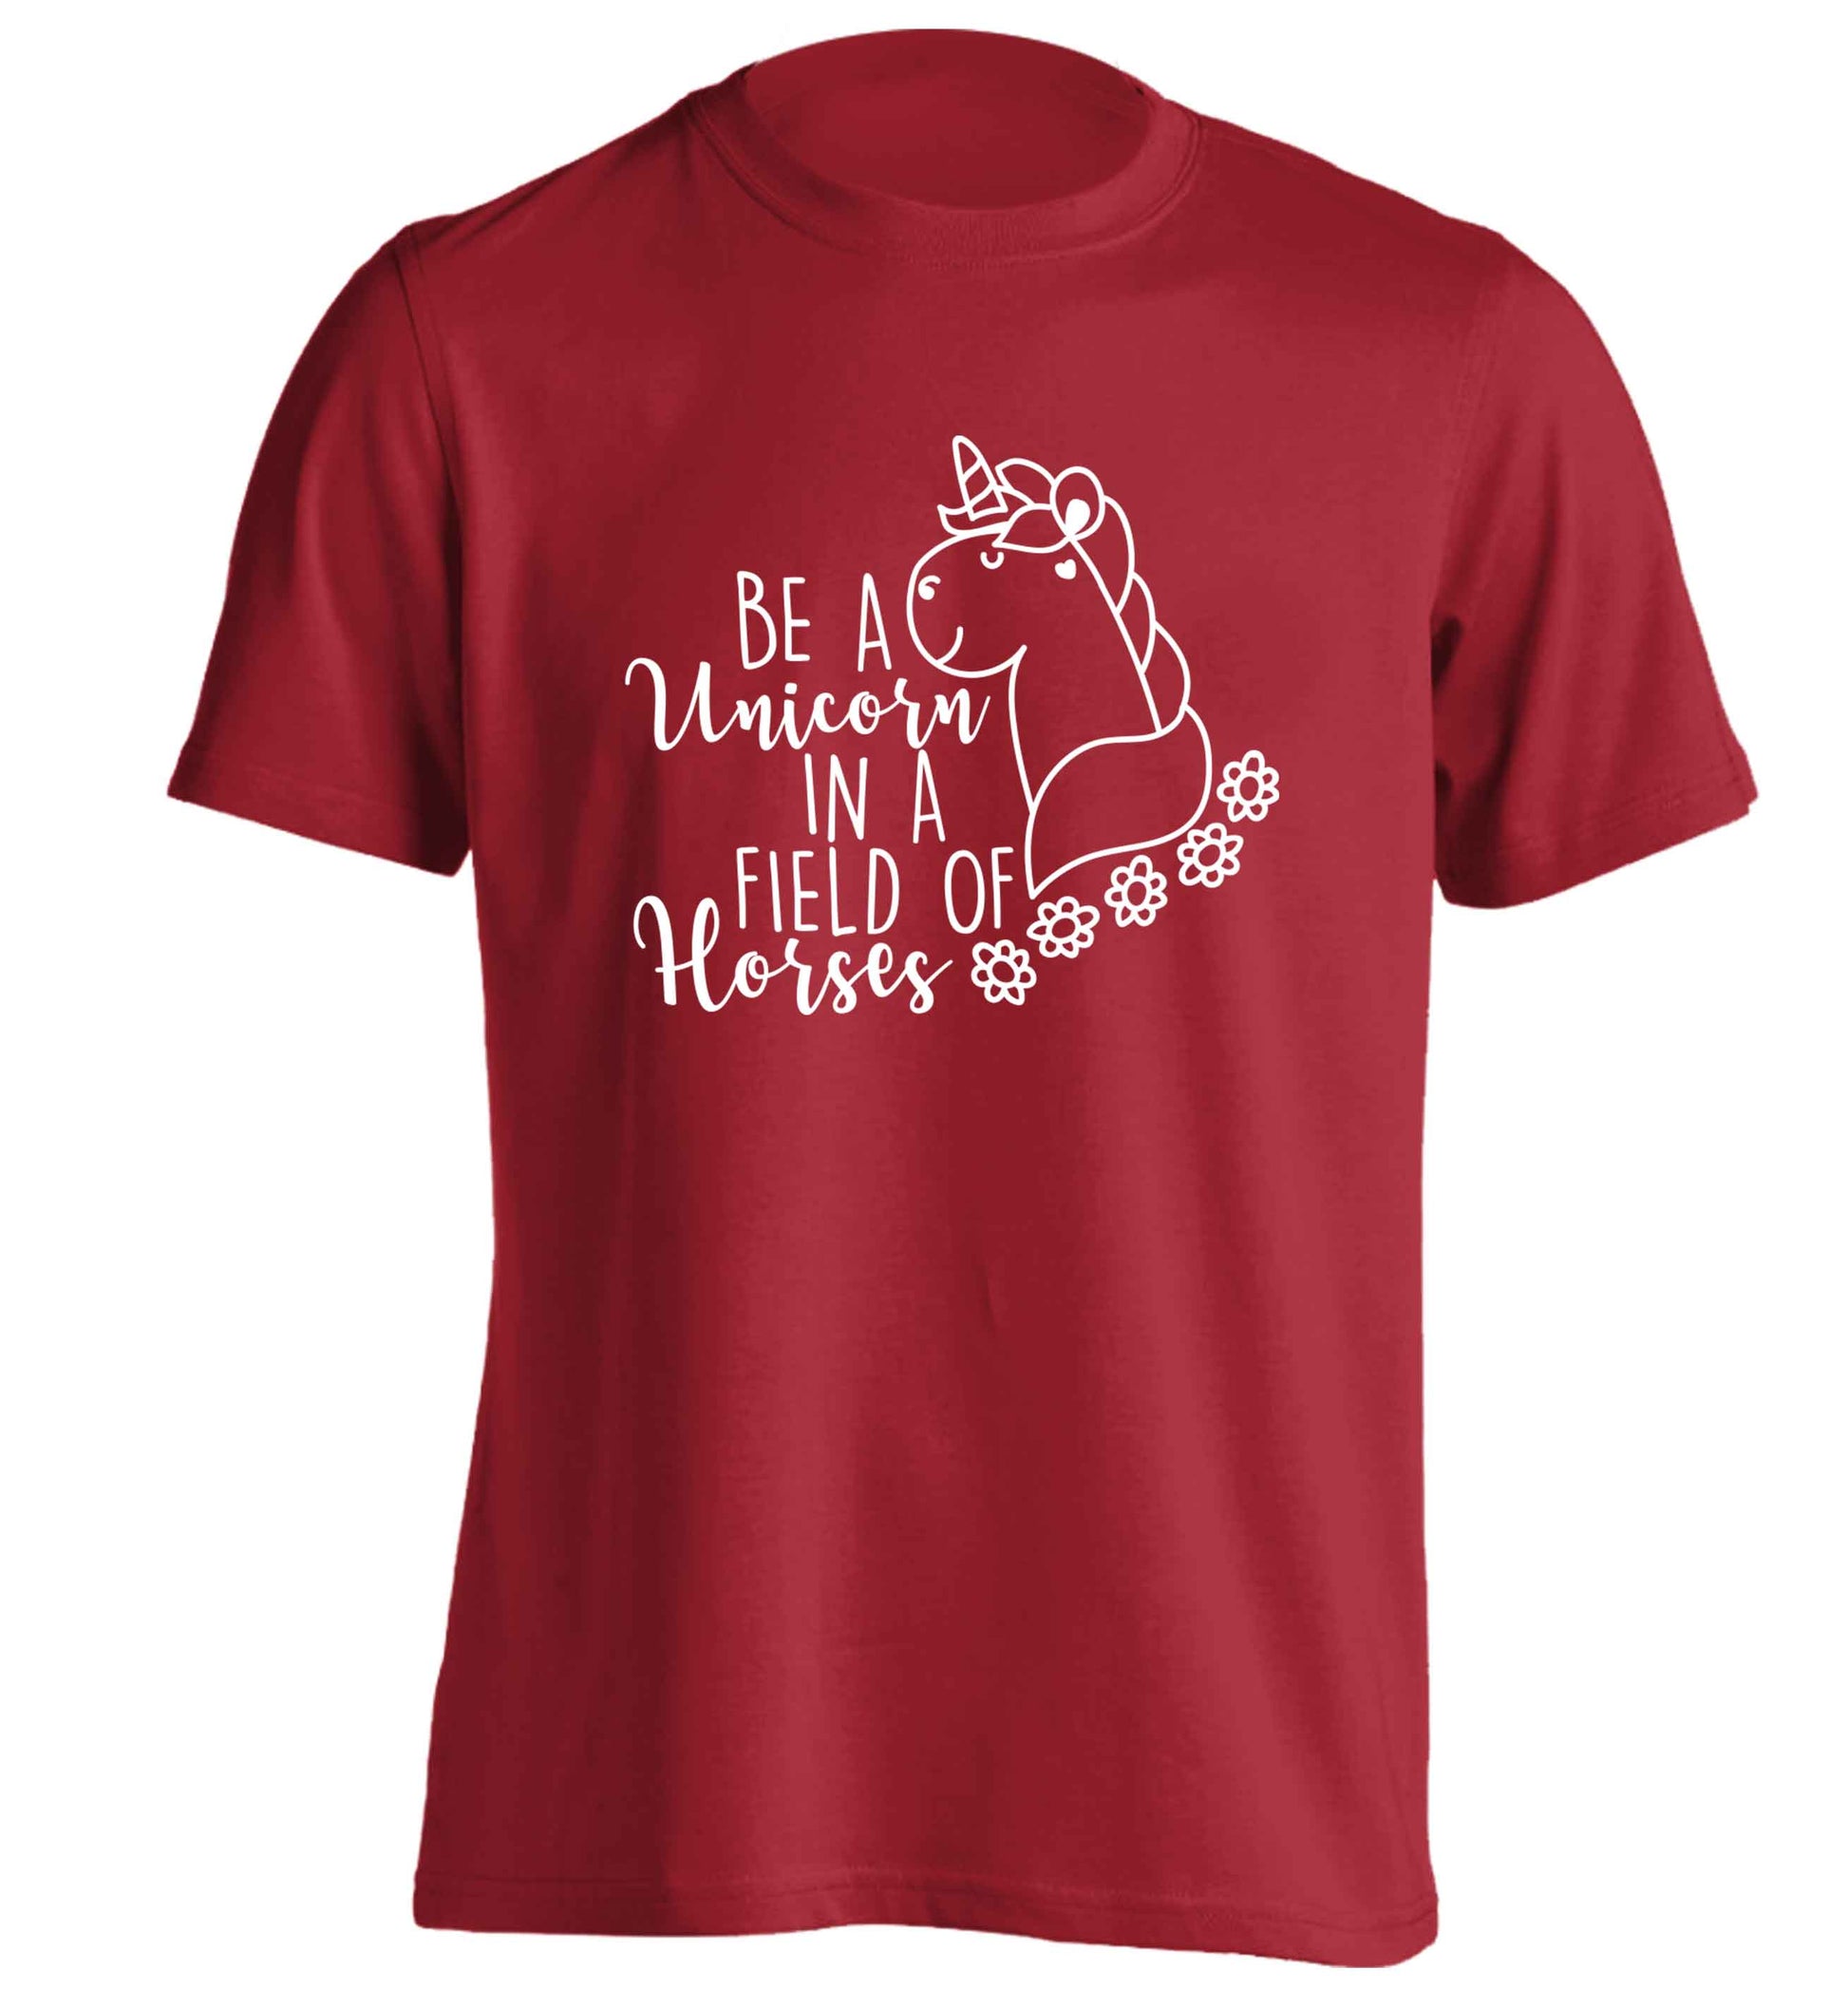 Be a unicorn in a field of horses adults unisex red Tshirt 2XL